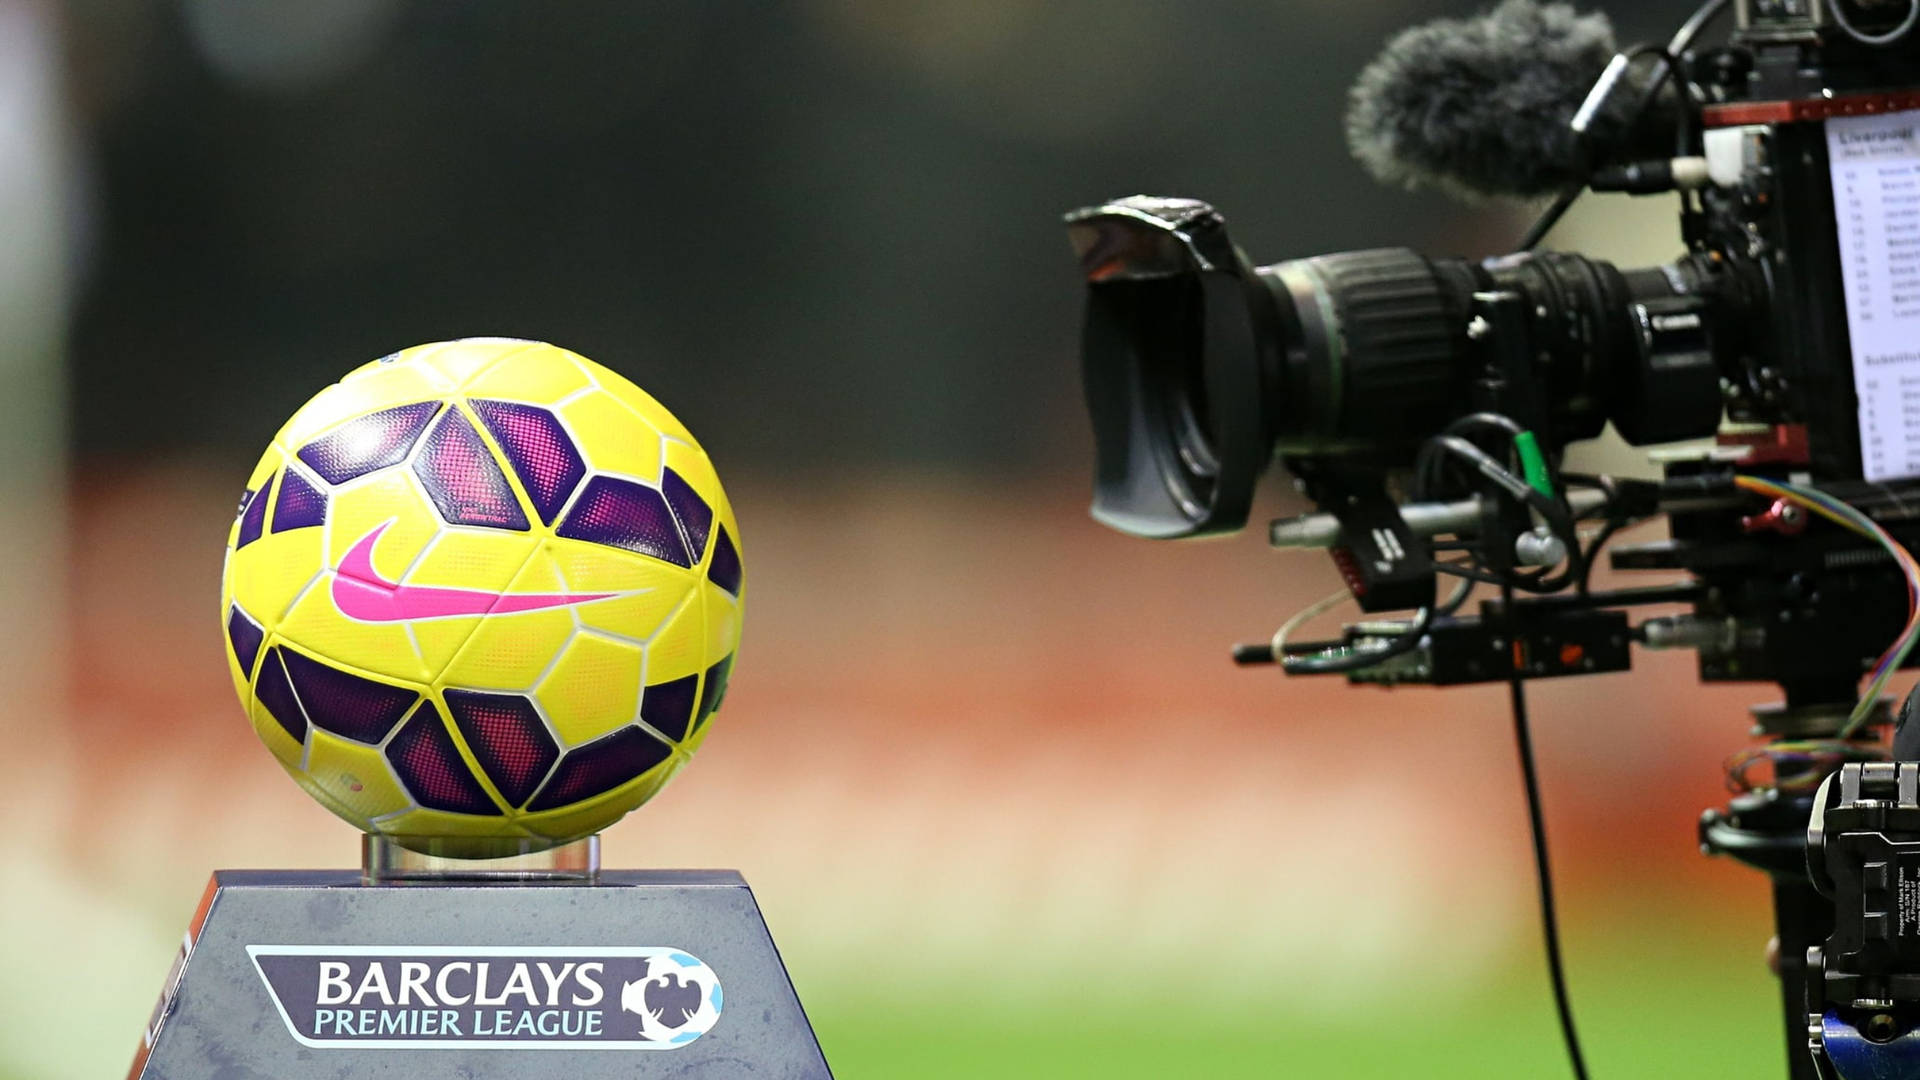 Premier League Soccer Ball With Camera